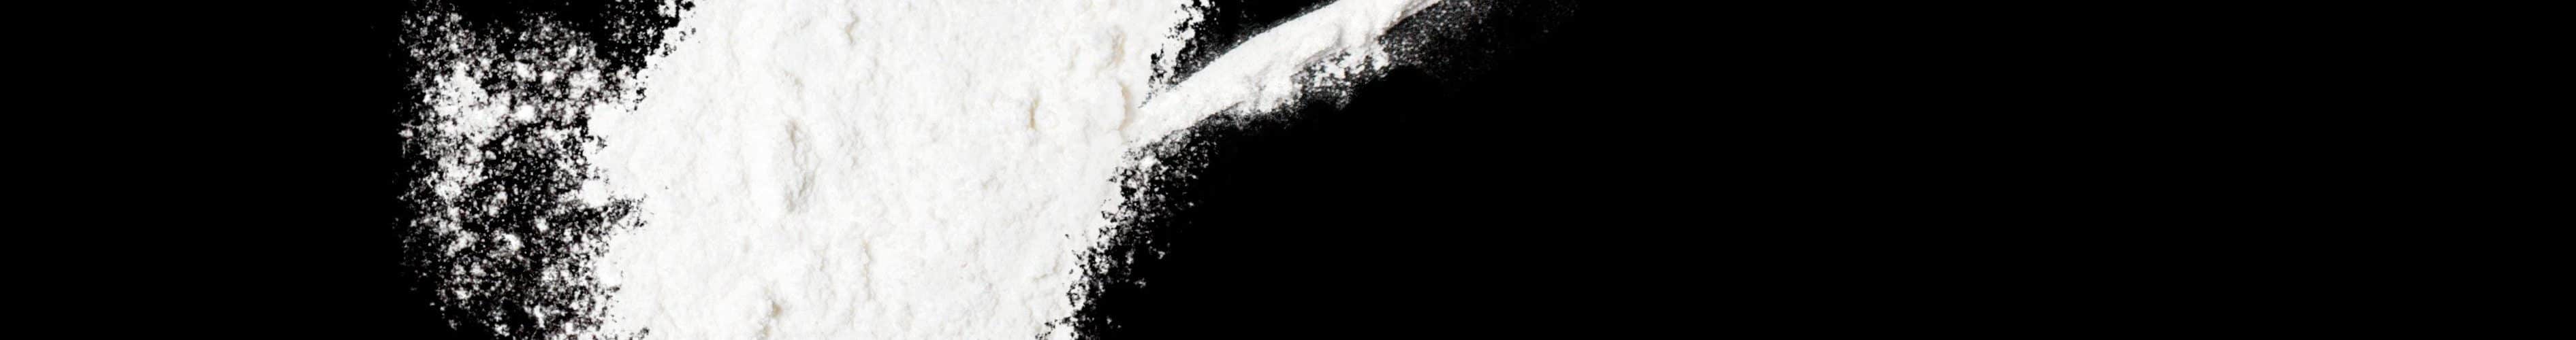 Canada approved cocaine sales for two companies in BC